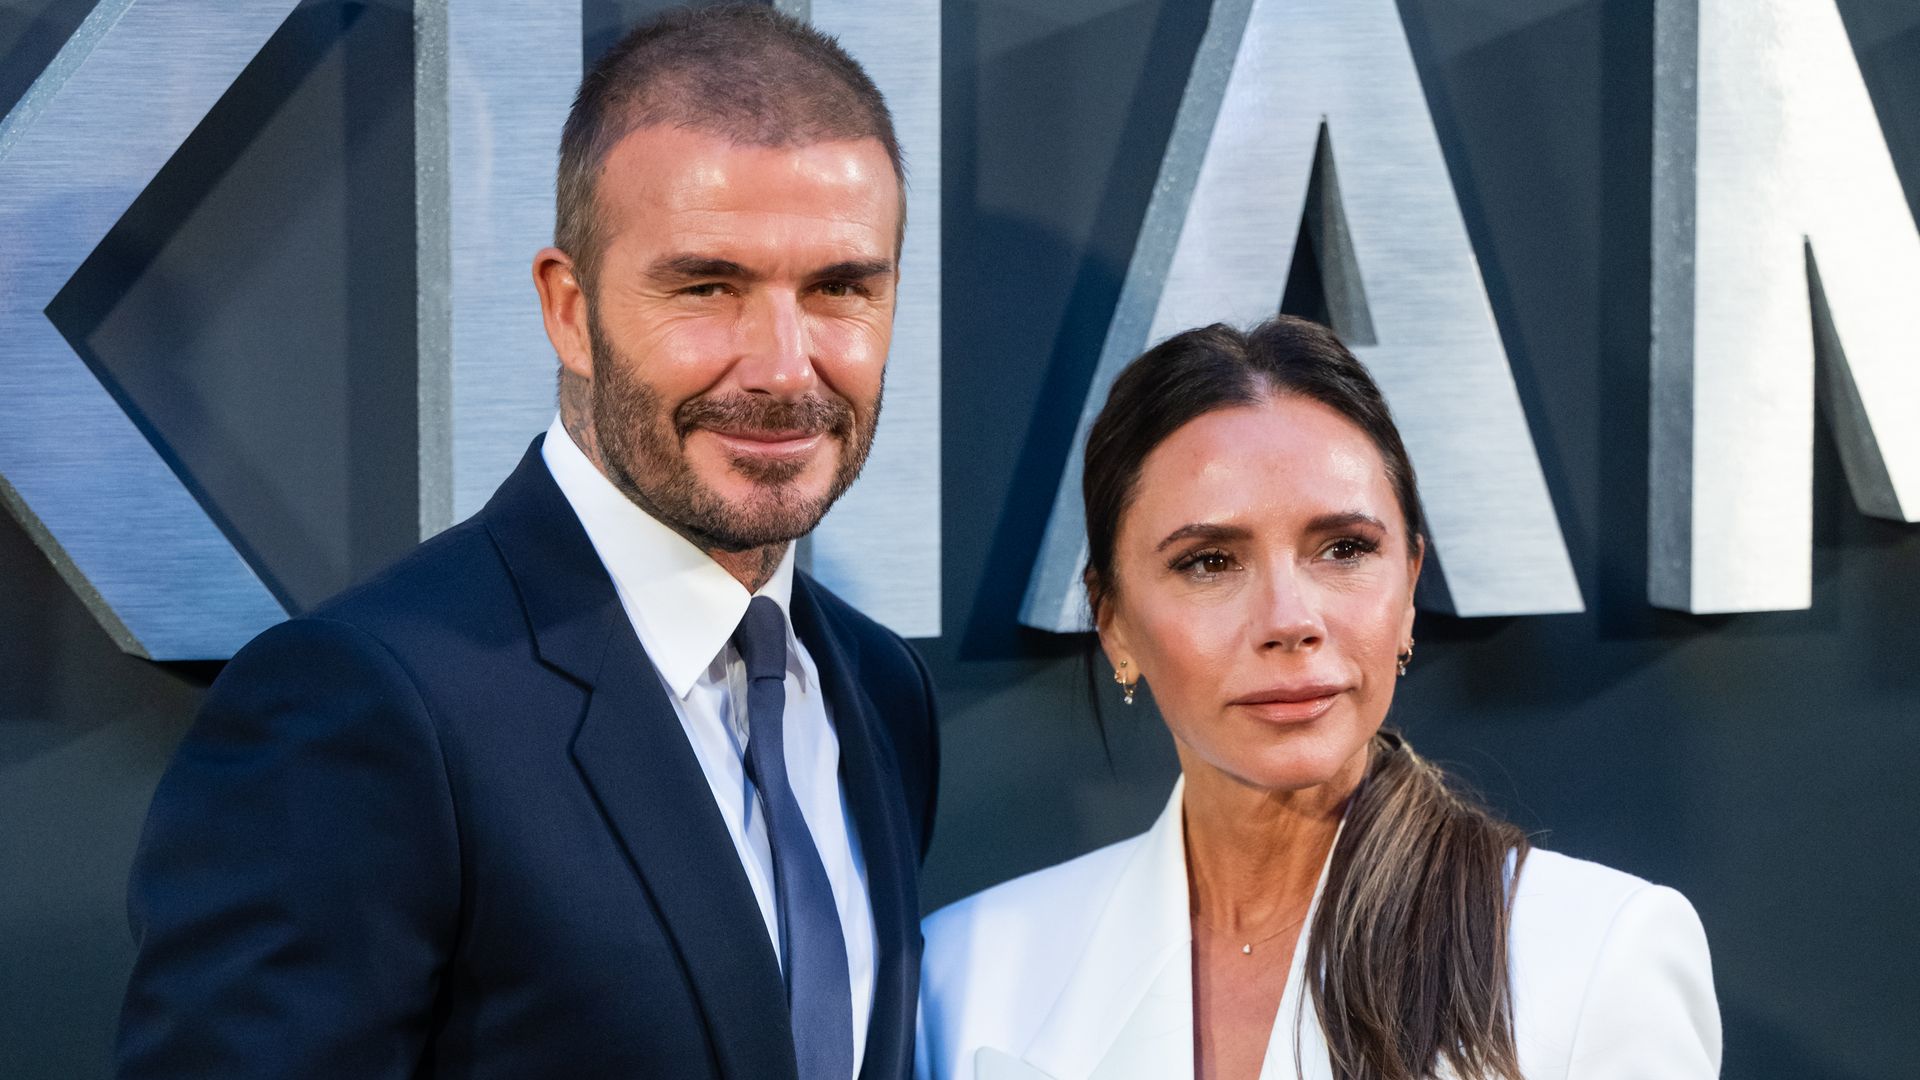 David Beckham surprises with photo of Victoria displaying bare baby bump in 50th birthday tribute